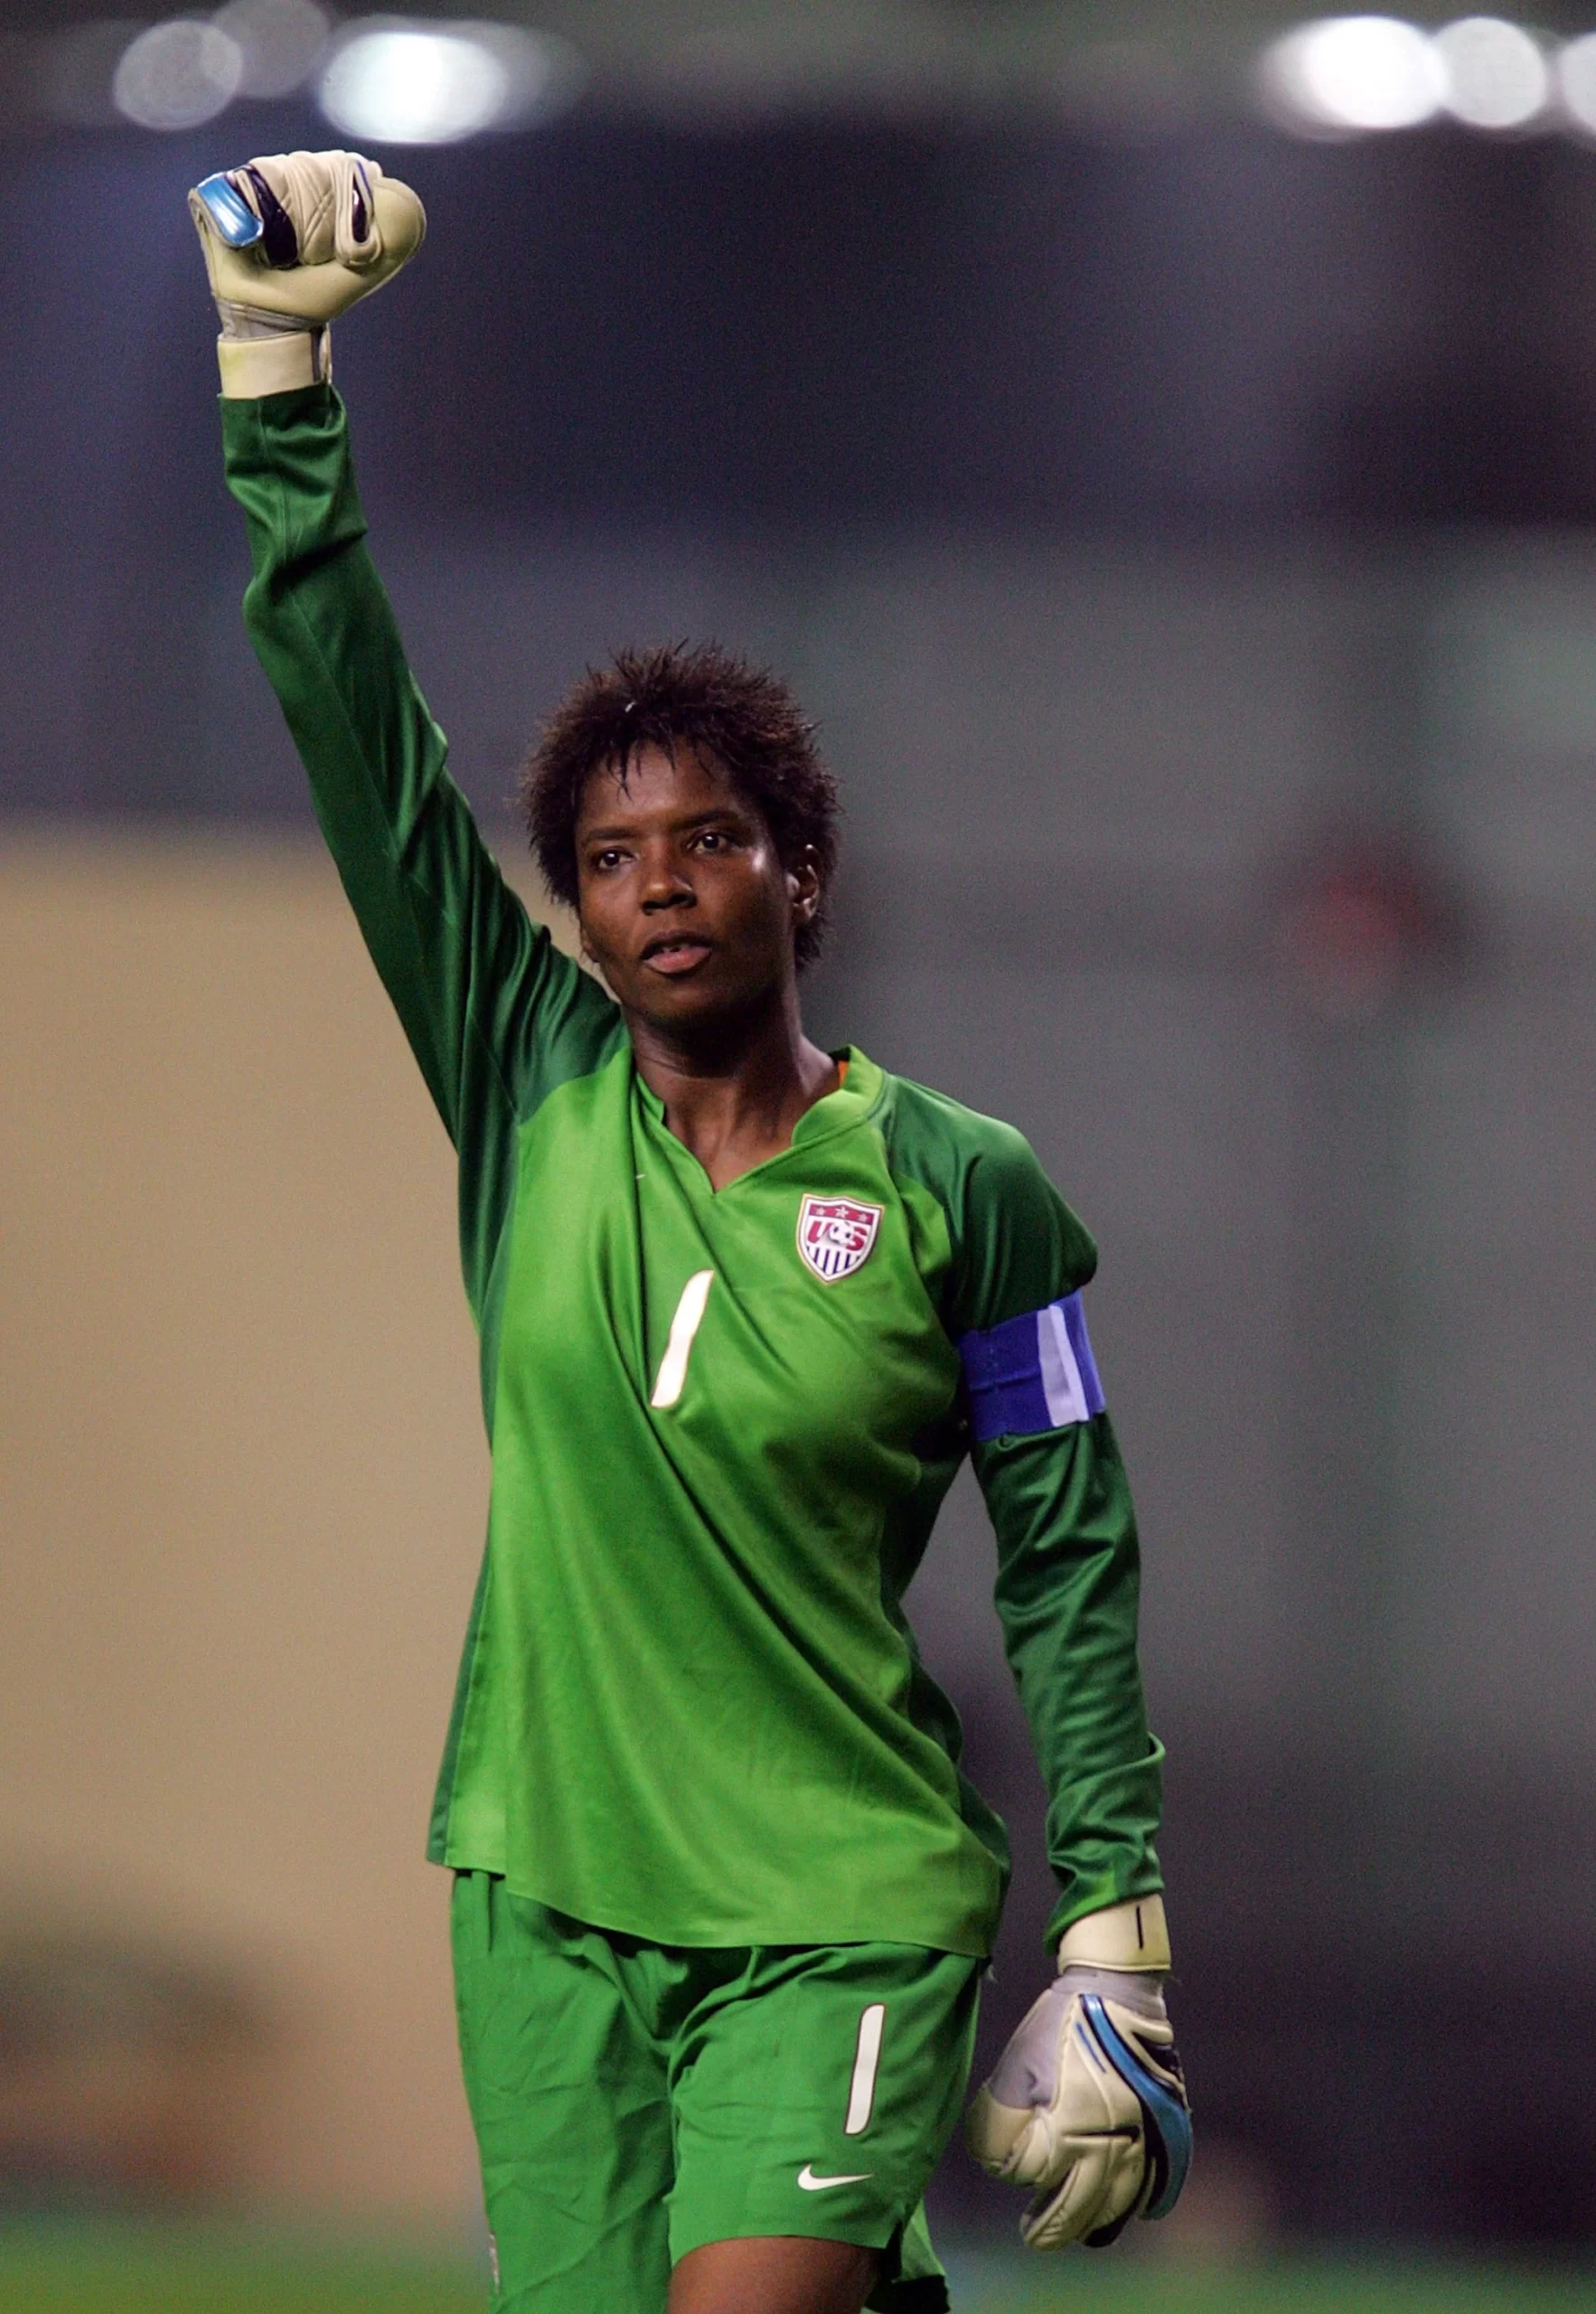 Briana Scurry, A Former Soccer Goalkeeper